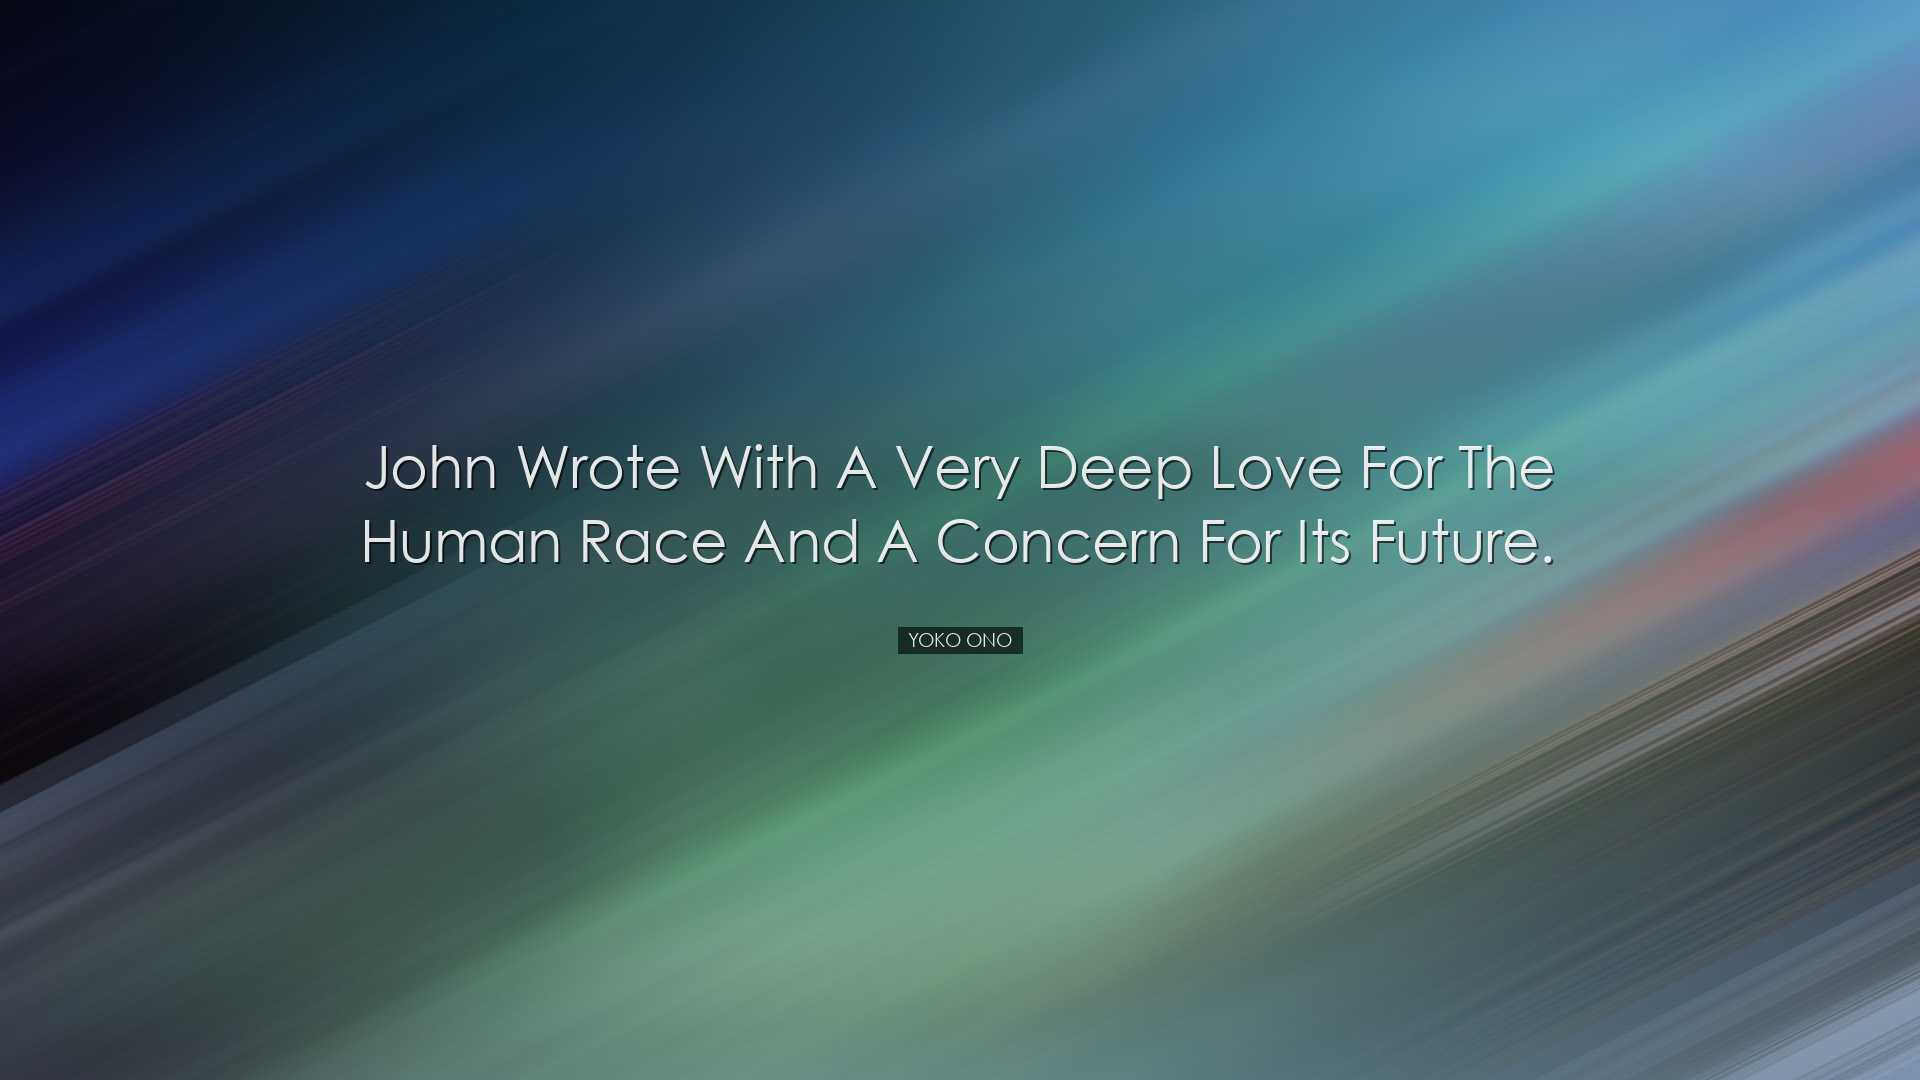 John wrote with a very deep love for the human race and a concern